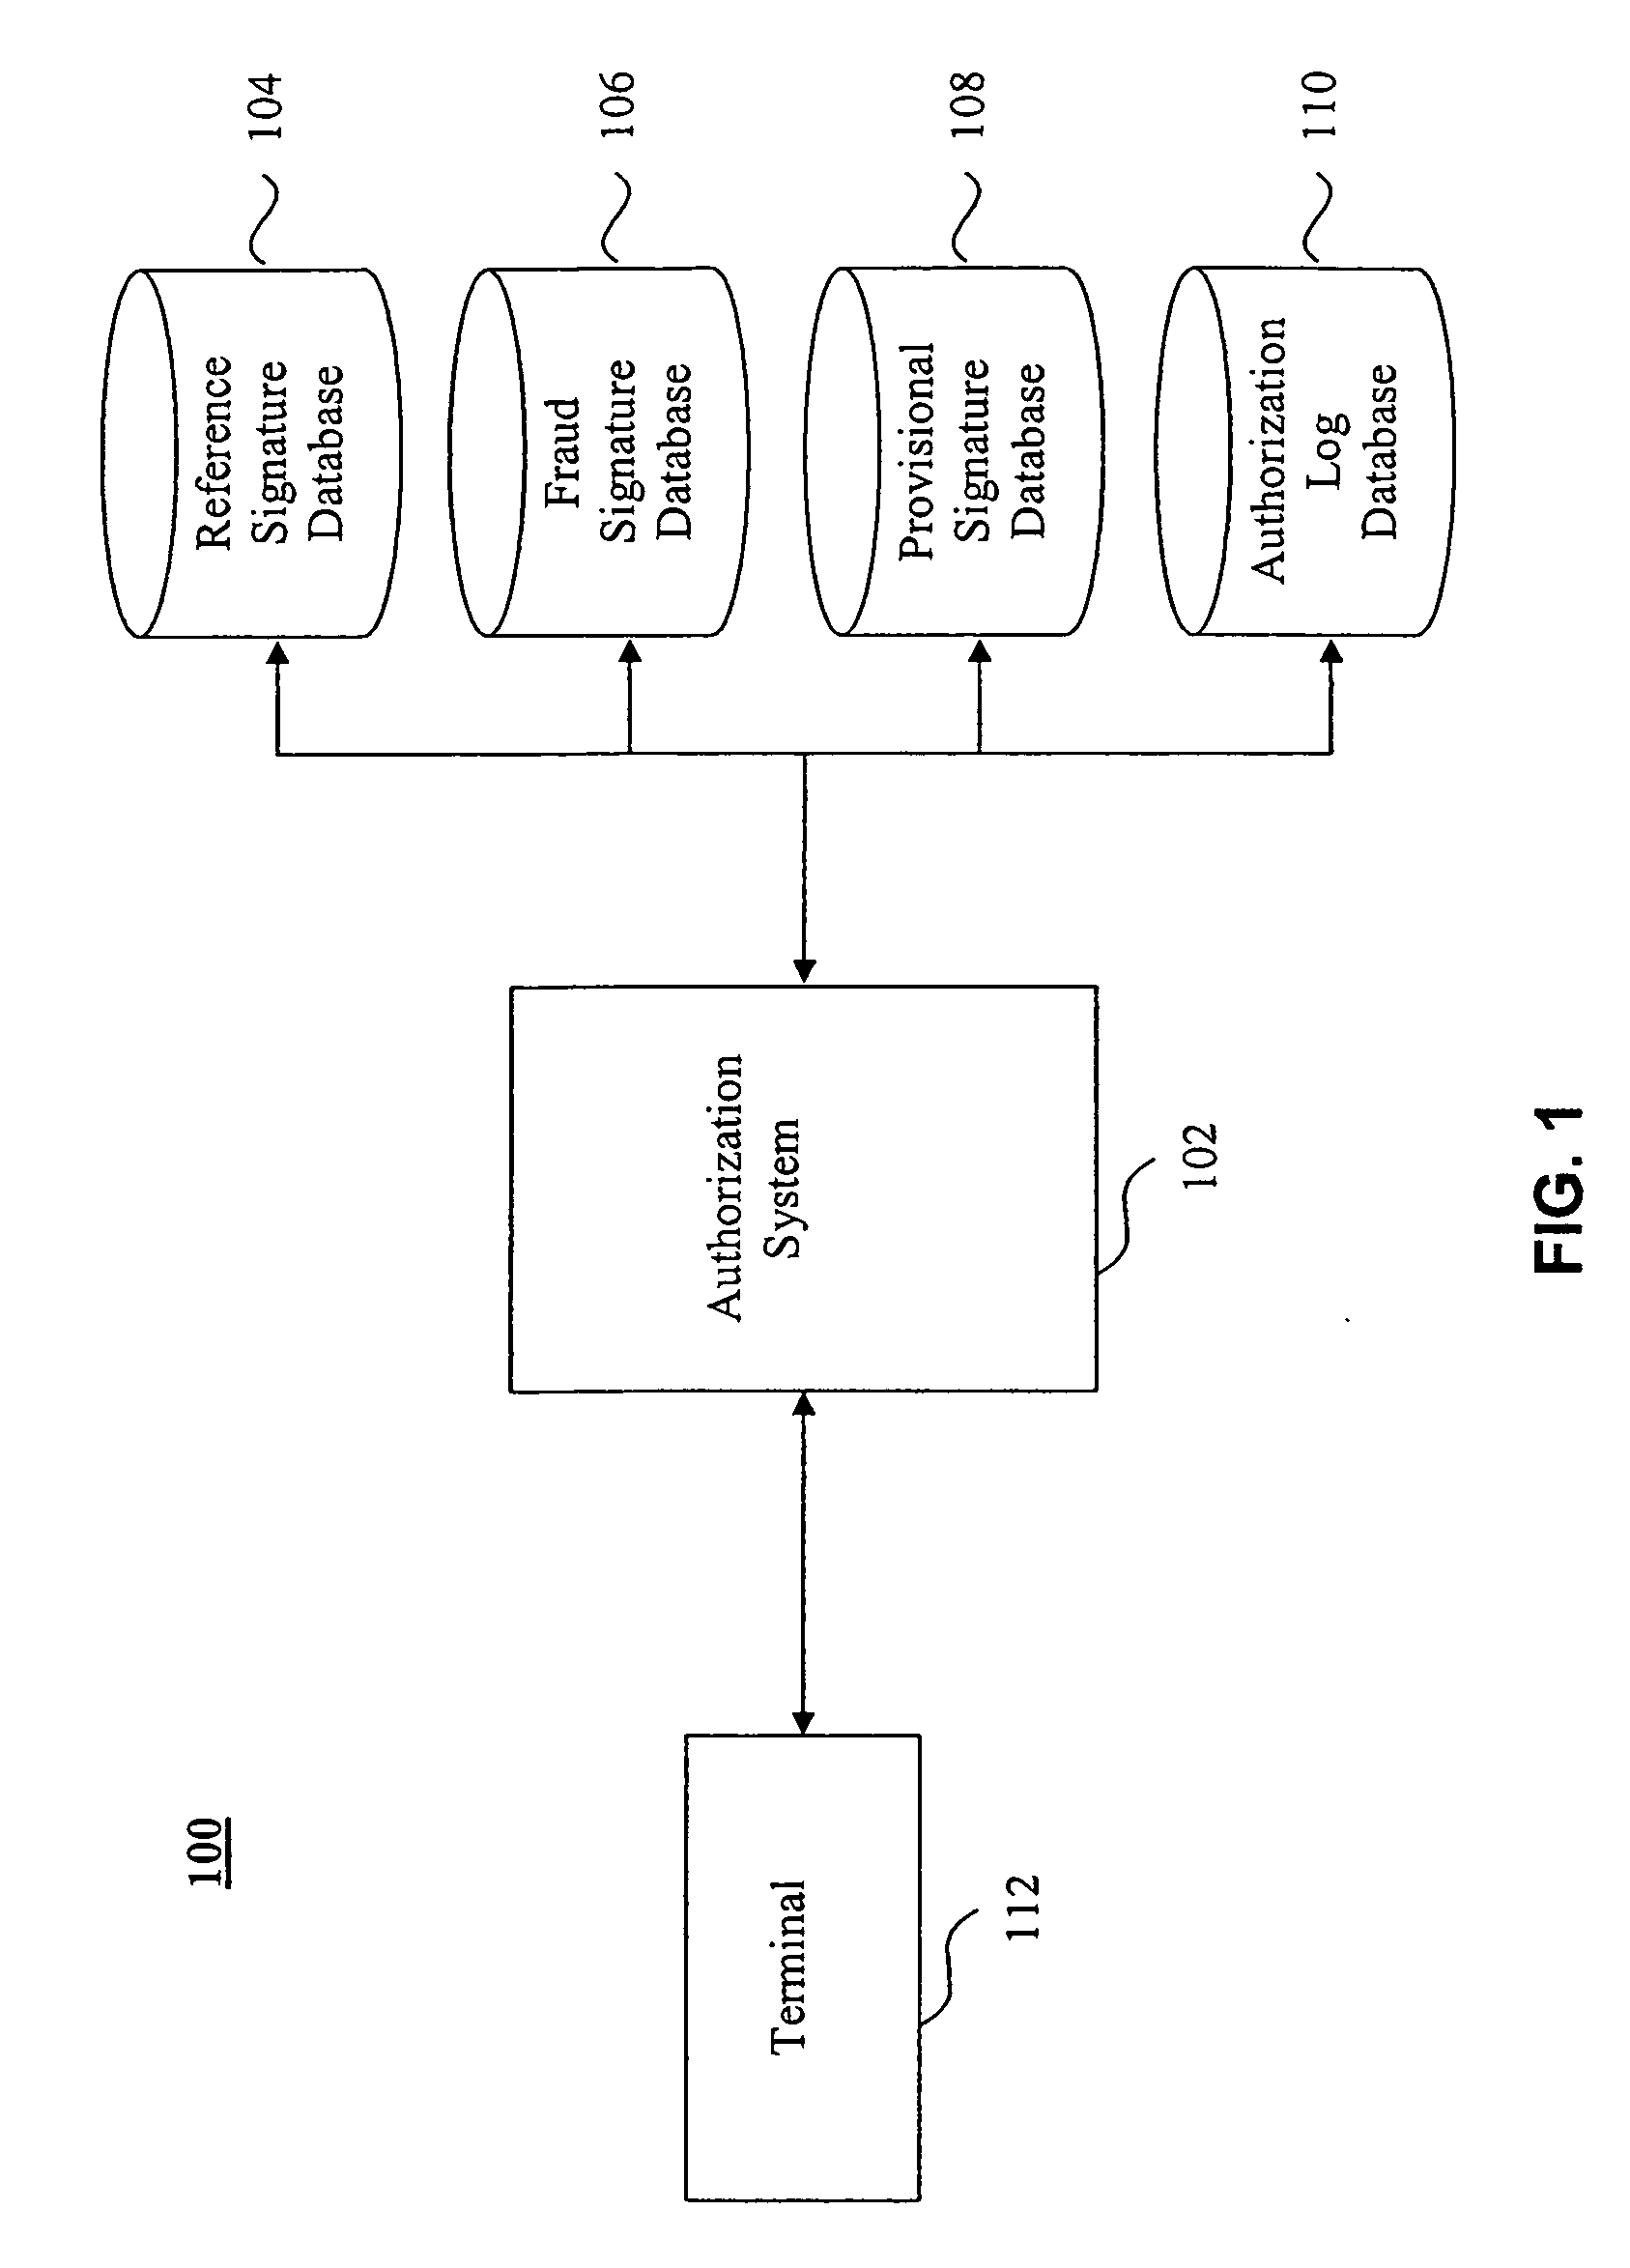 System, method and computer program product for POS-based capture of reference magnetic signatures